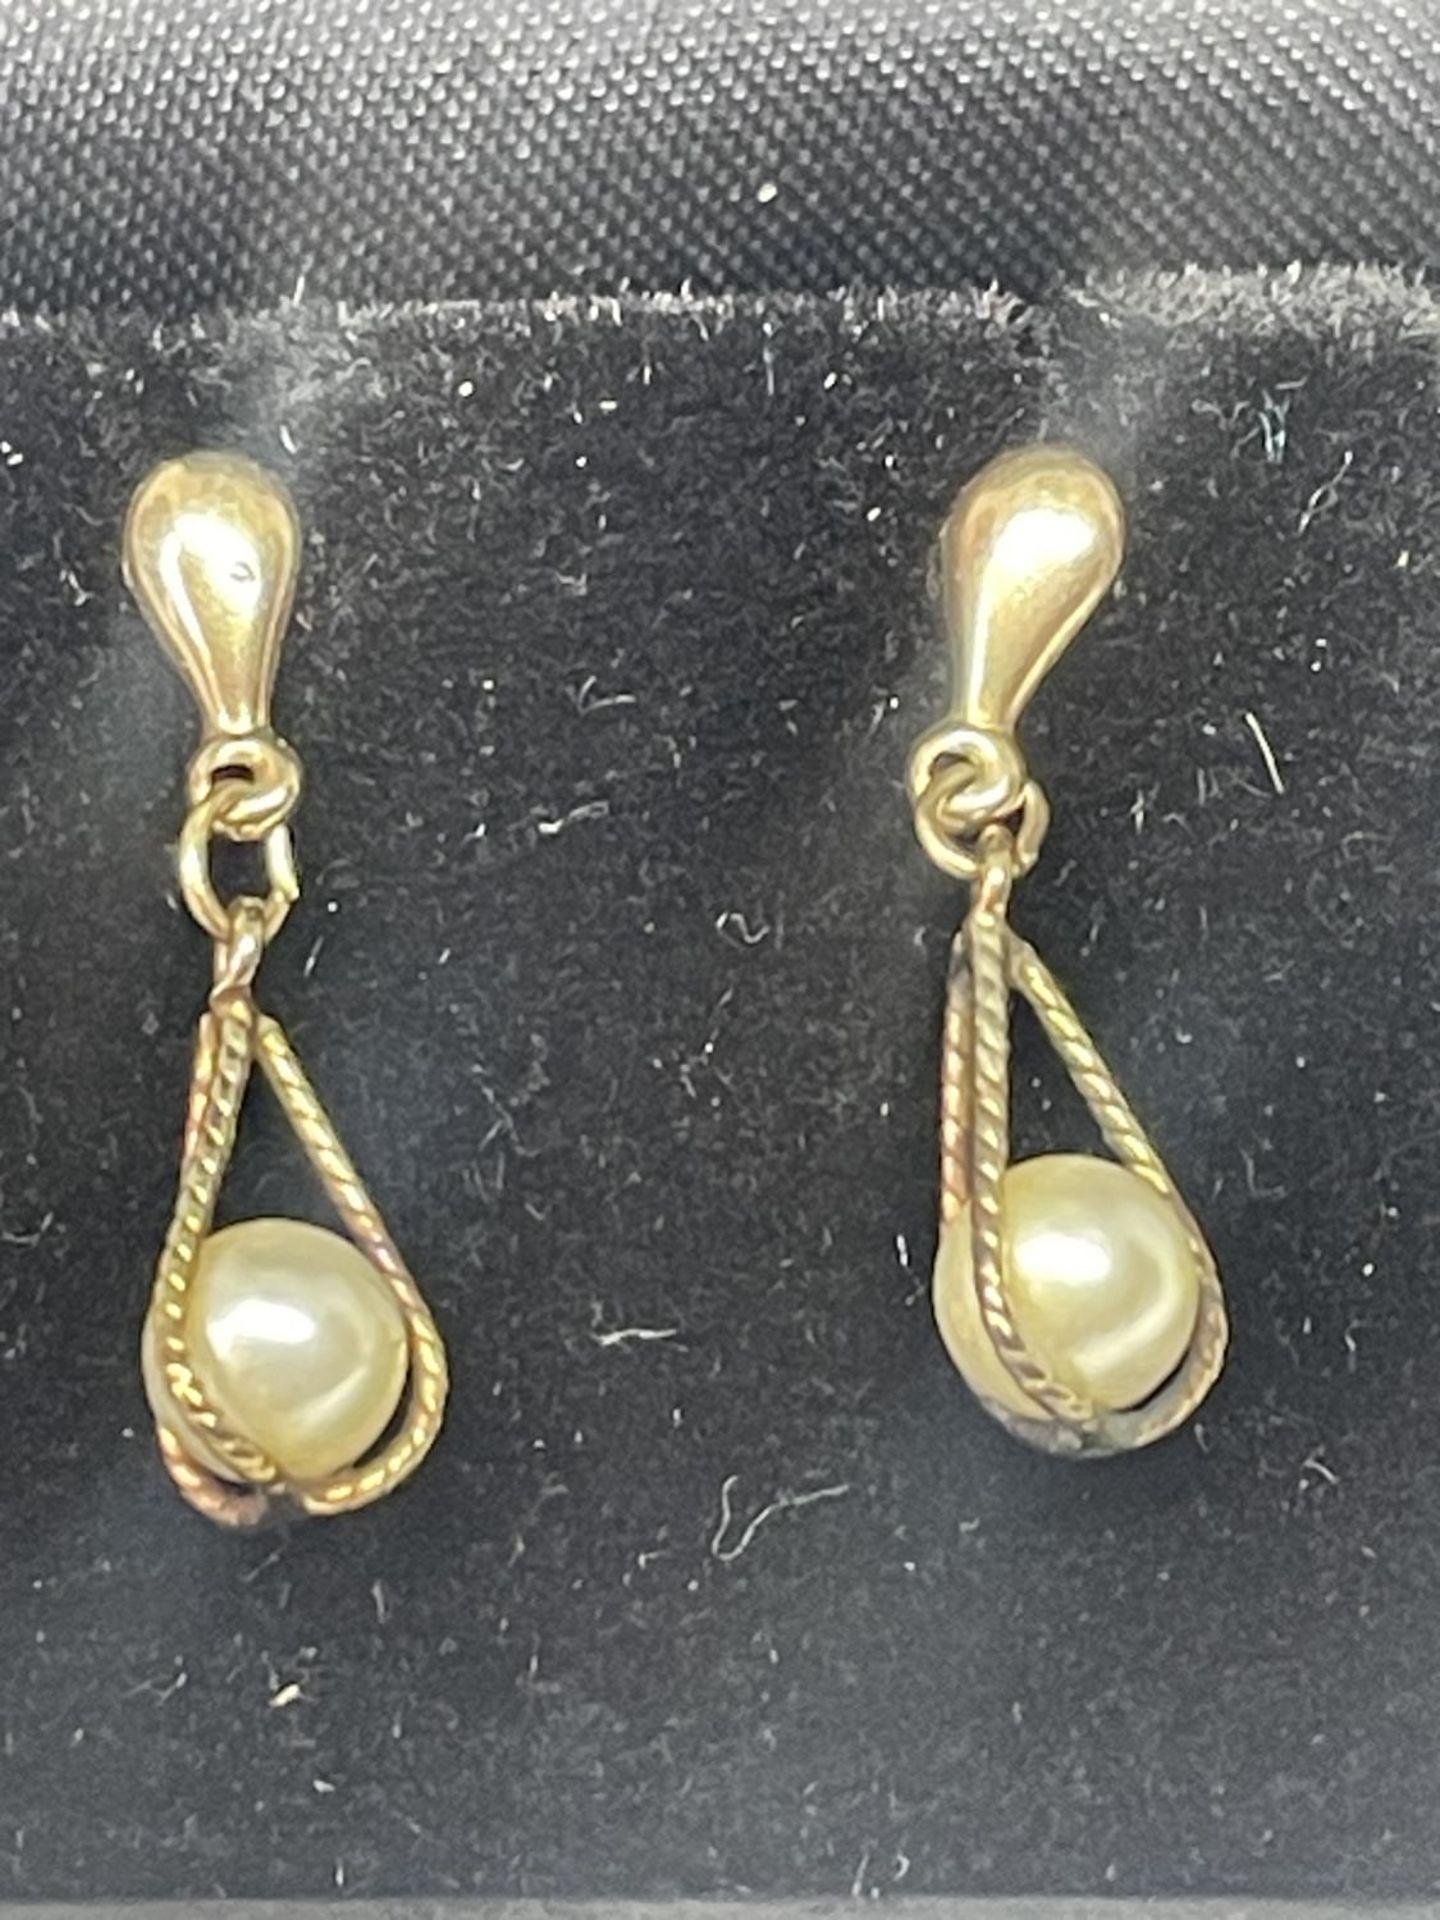 A PAIR OF 9 CARAT GOLD AND PEARL EARRINGS IN A PRESENTATION BOX - Image 2 of 3